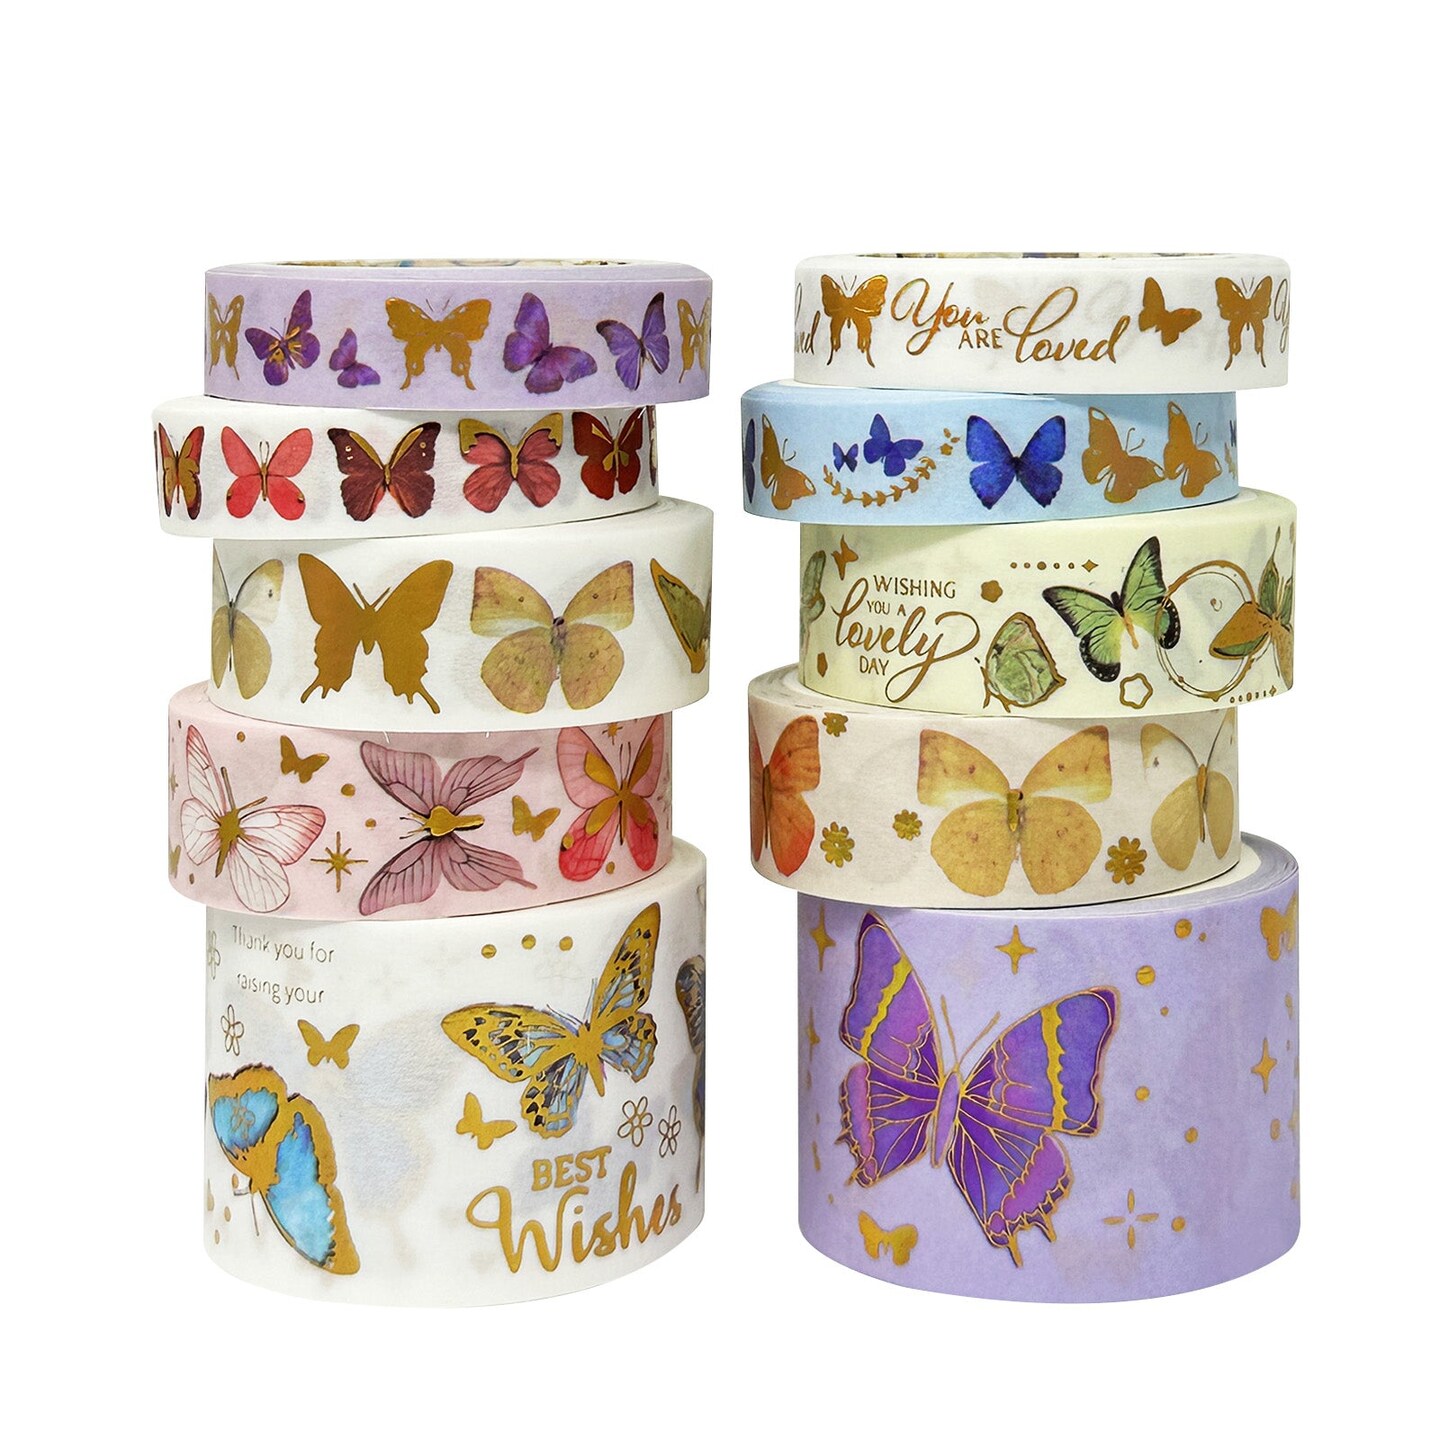 Rose Gold Foil Narrow Crafting Washi Tape Set by Recollections